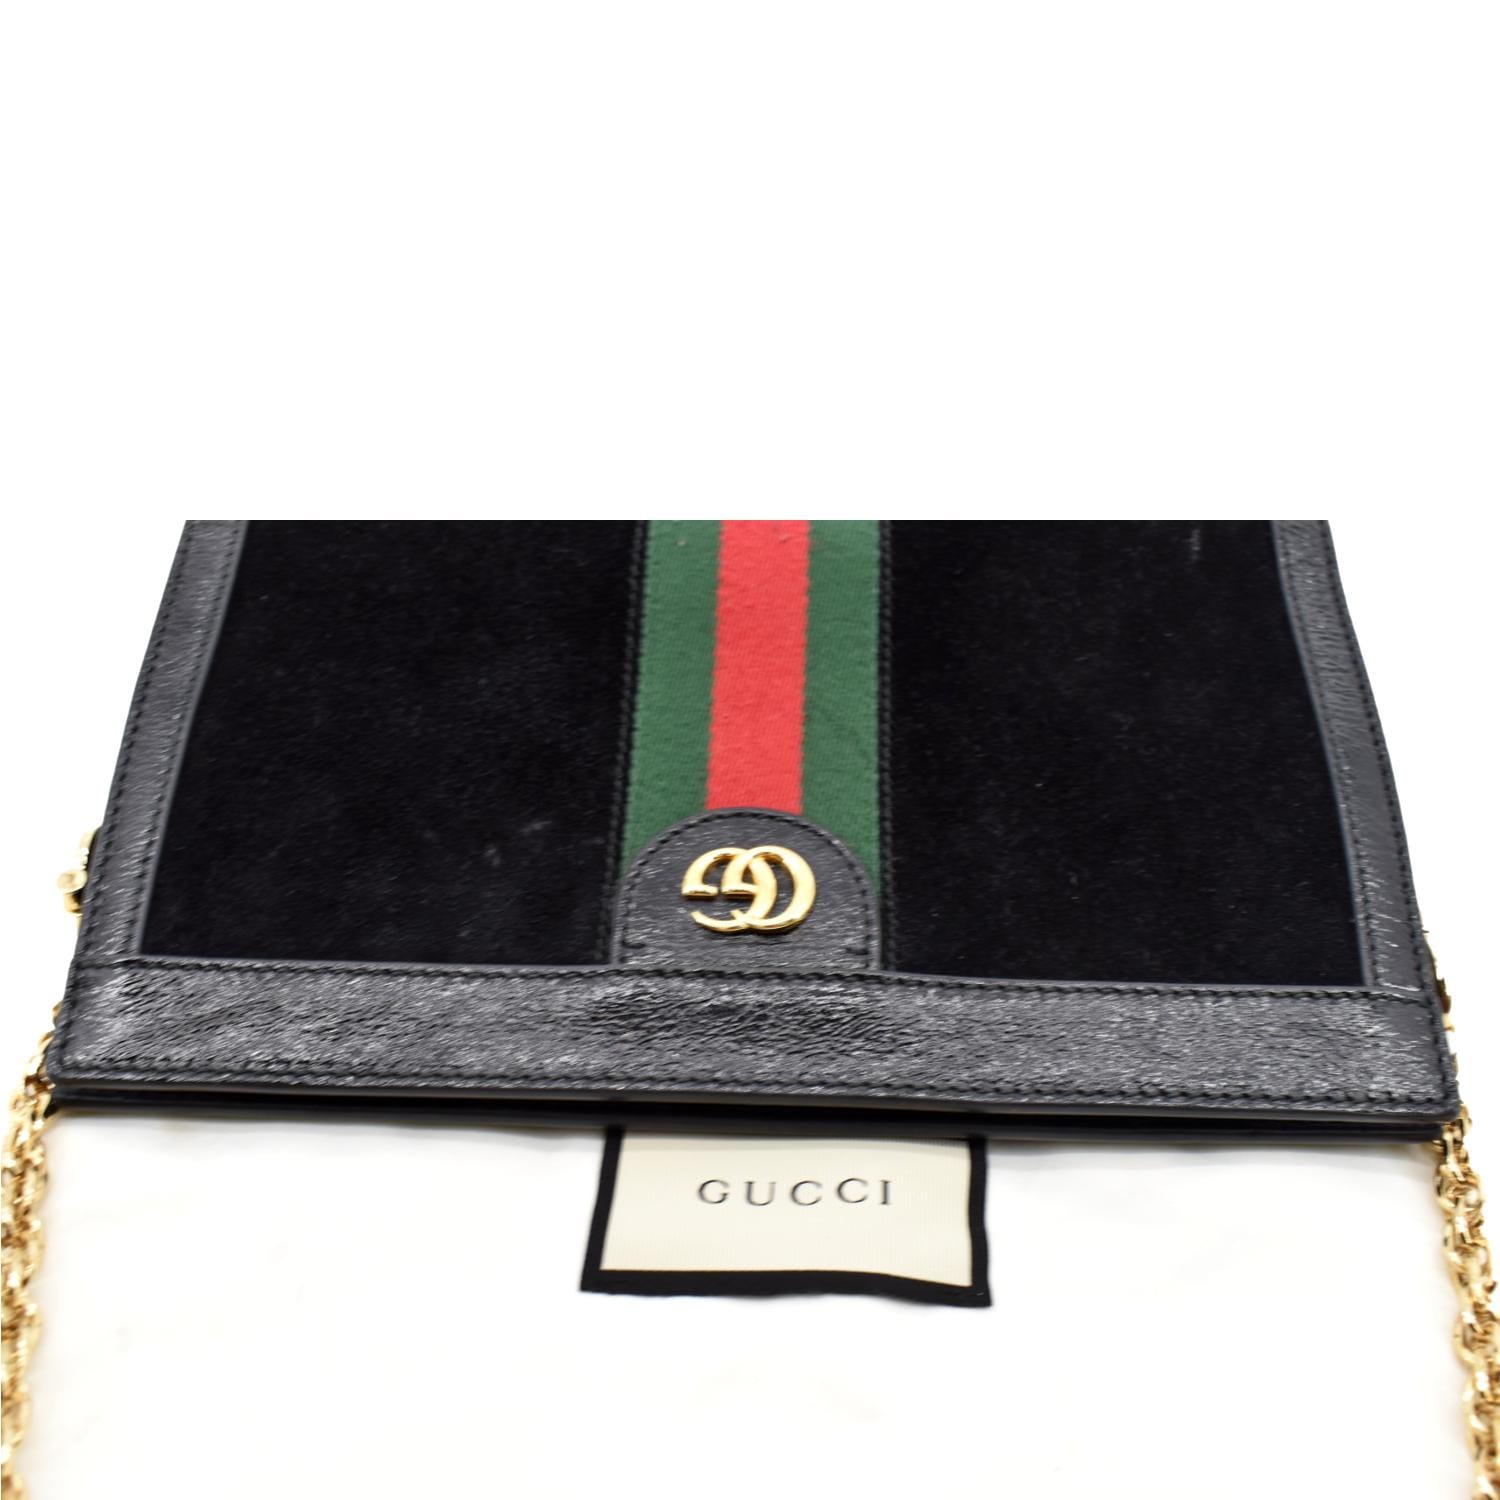 Authentic Gucci calfskin GG web small Ophidia chain shoulder bag